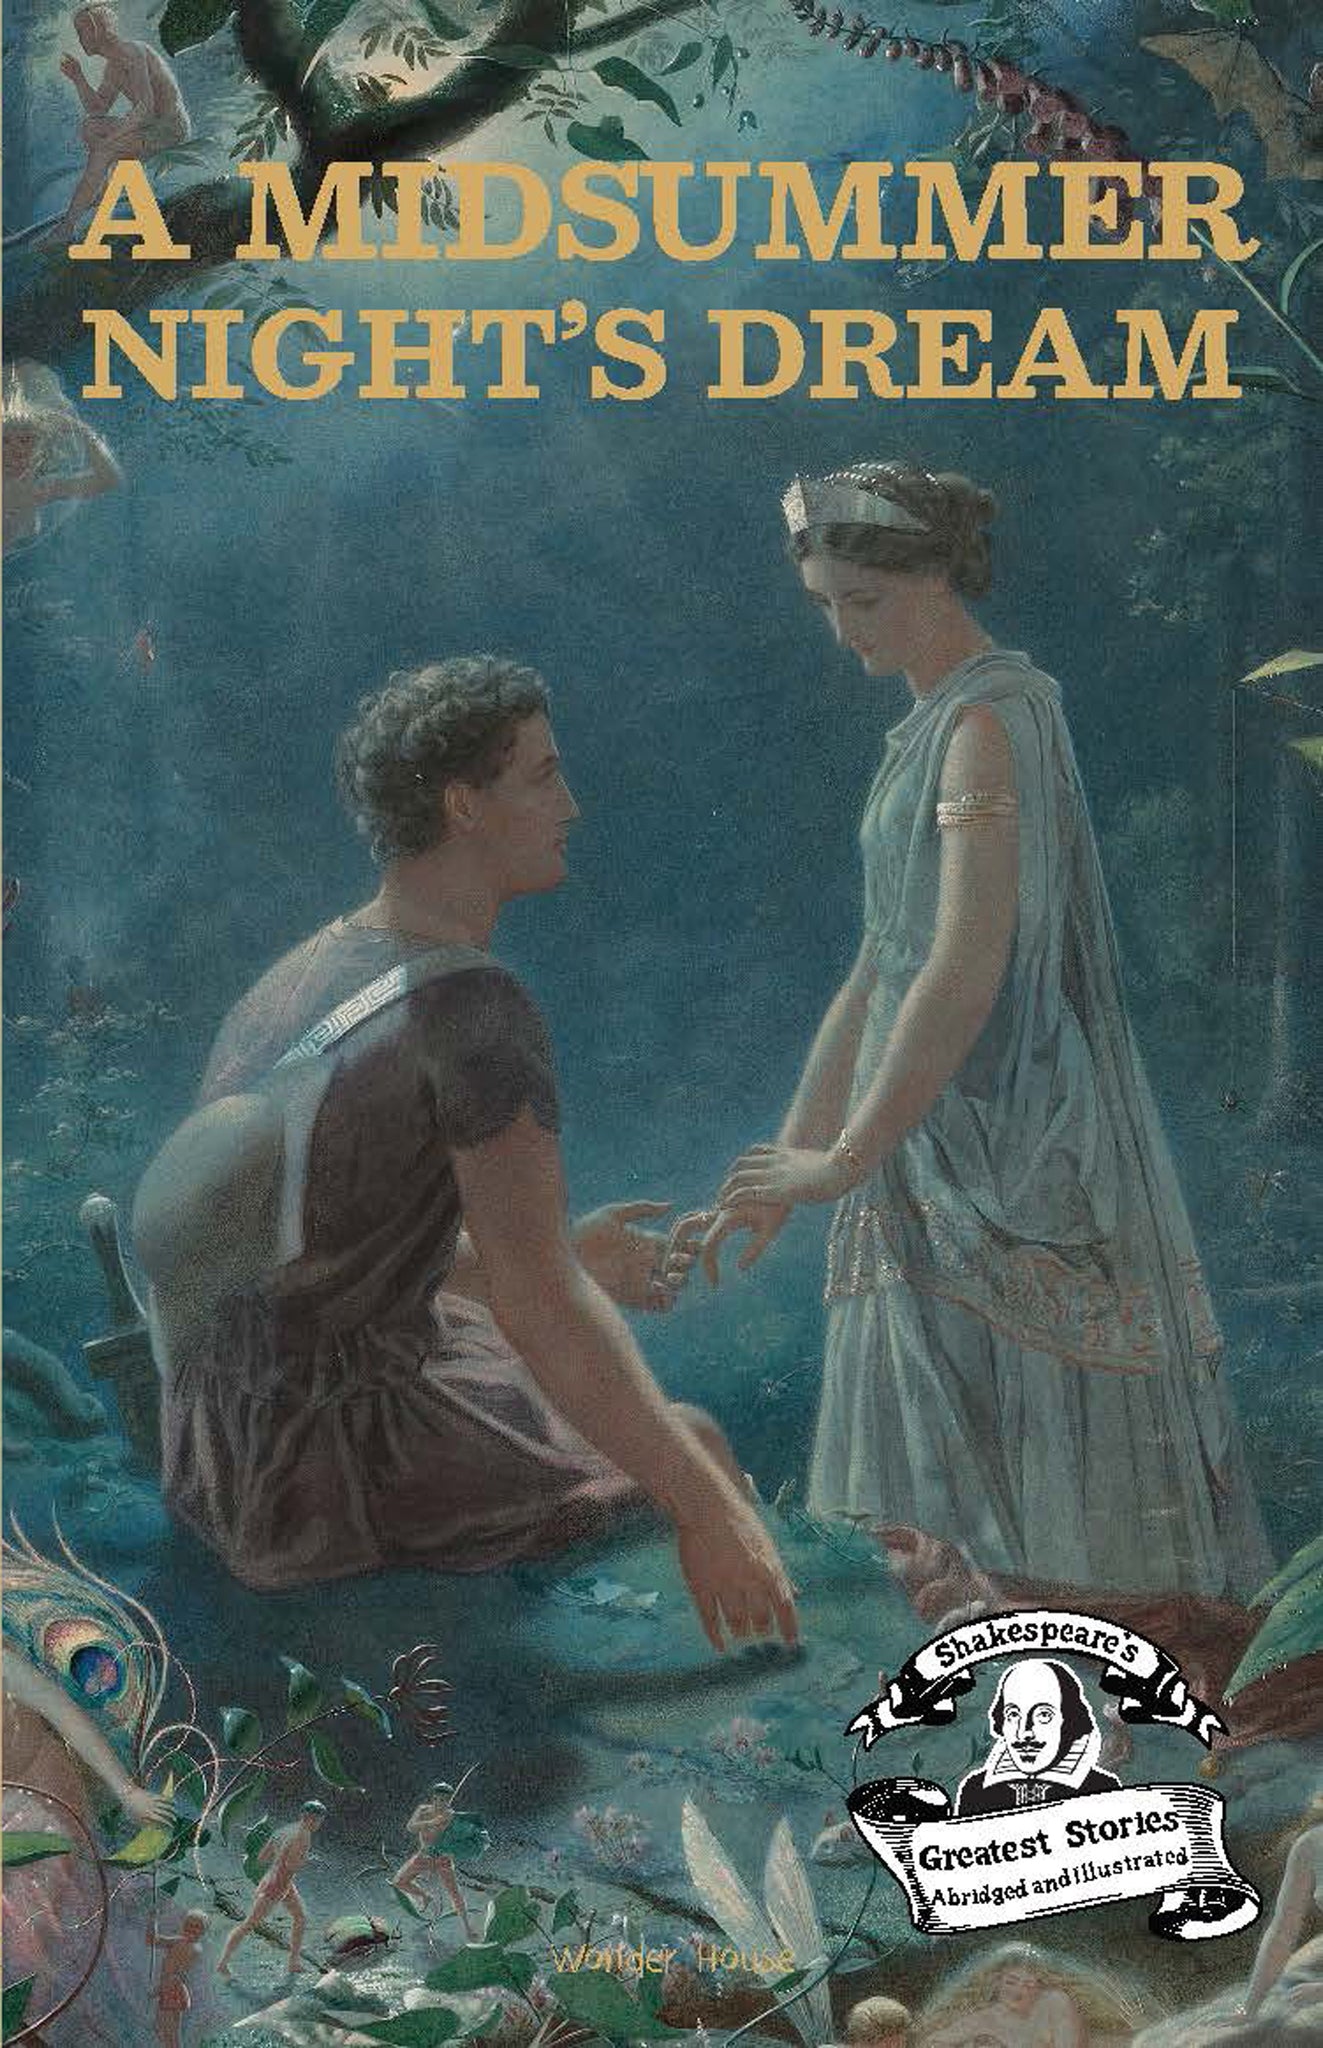 A Midsummer Night's Dream : Shakespeares Greatest Stories (Abridged and Illustrated) With Review Questions And An Introduction To The Themes In The Story